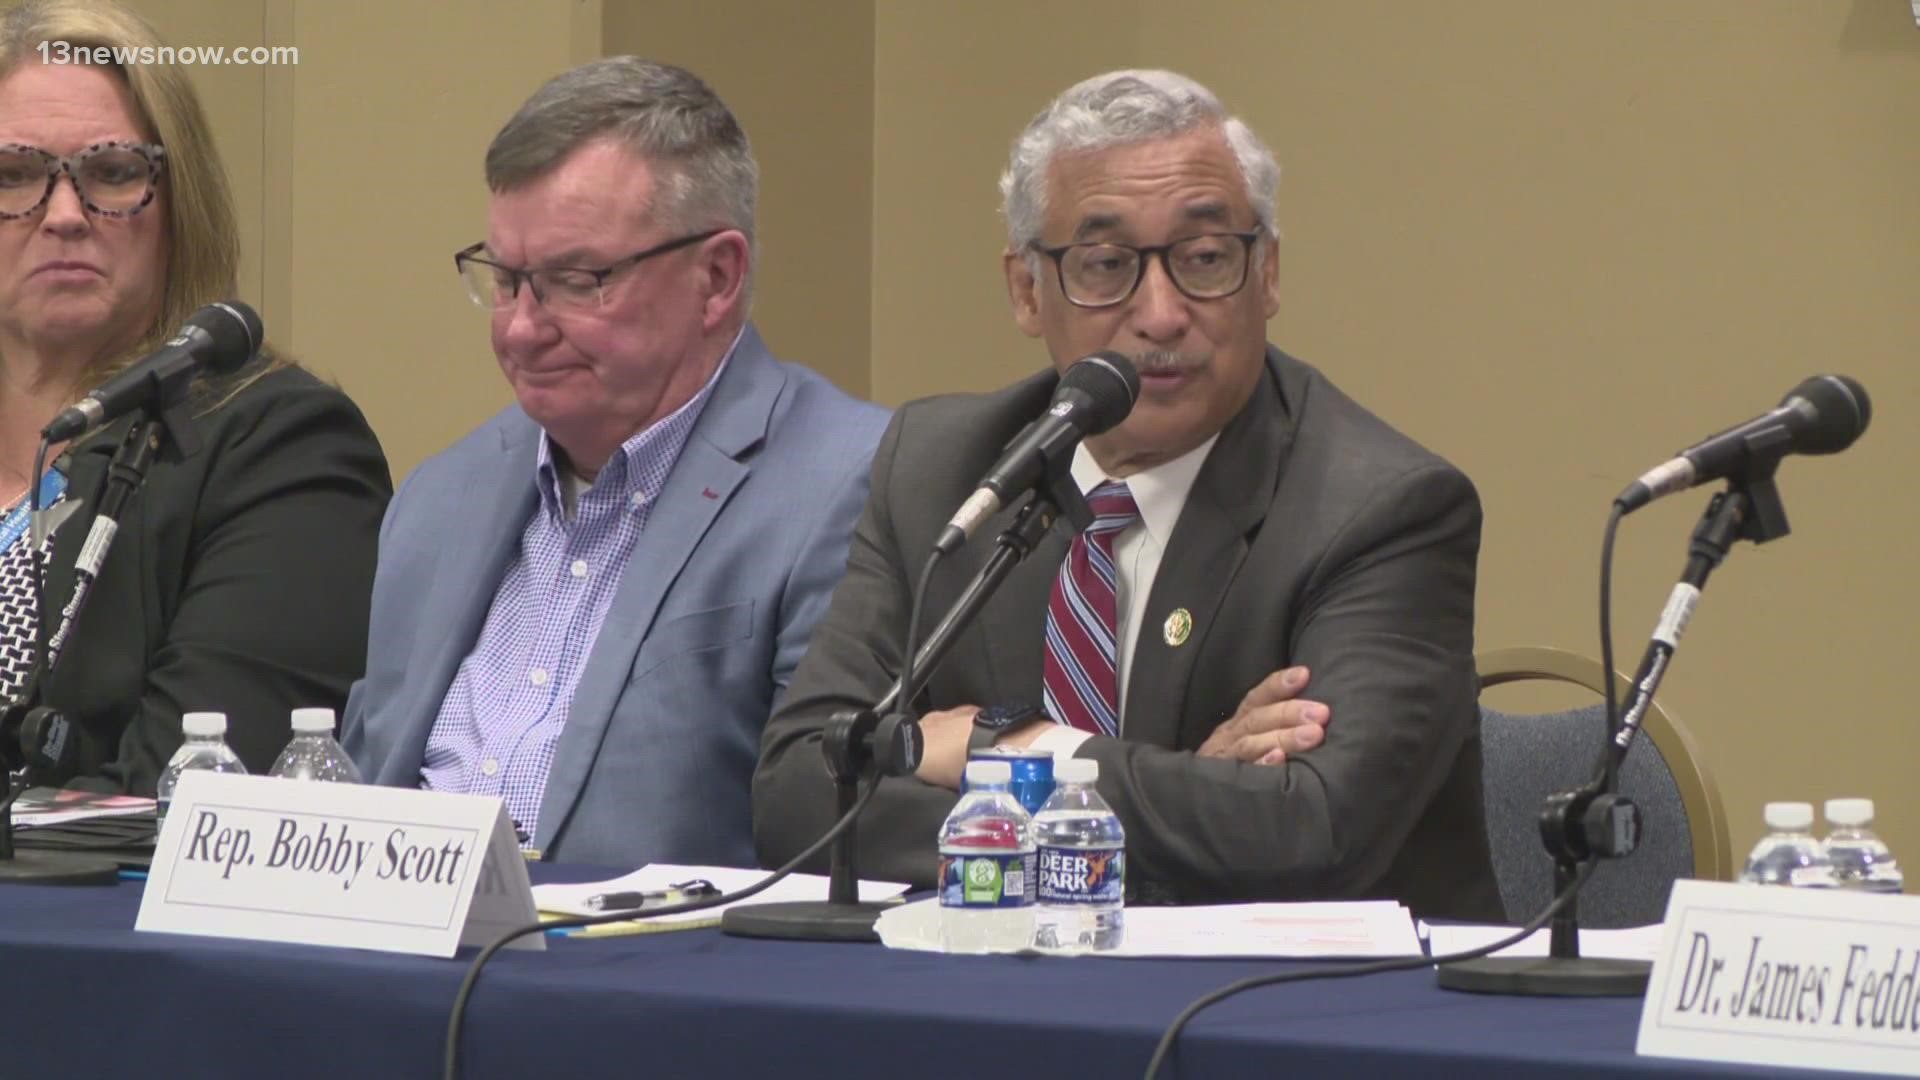 Congressman Bobby Scott is searching for solutions to make sure students and staff are safe in Virginia classrooms.